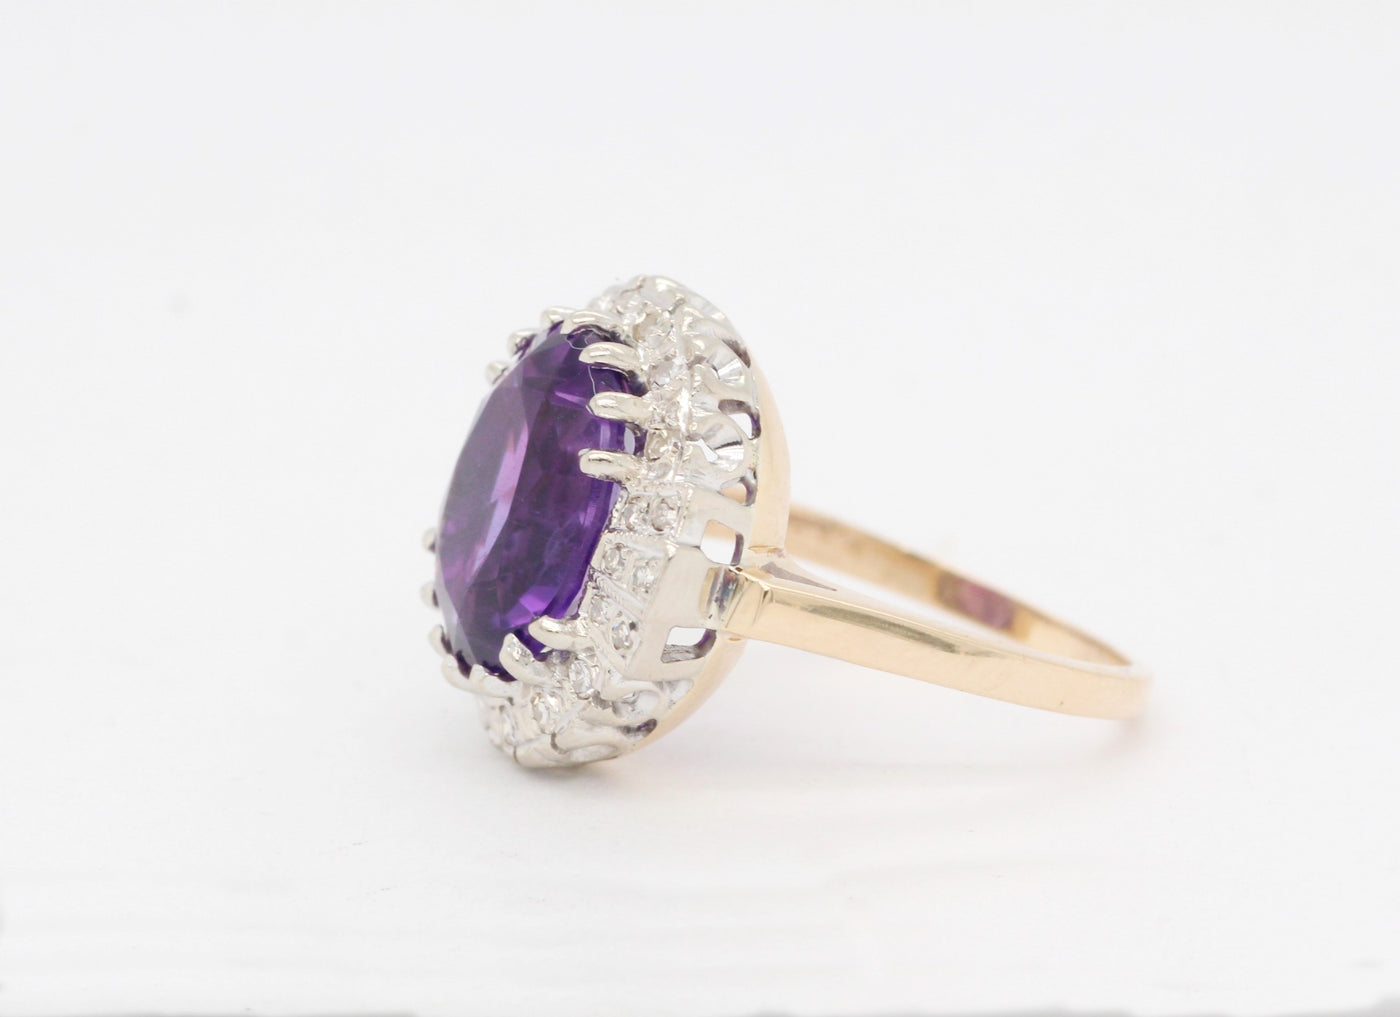 Estate 14K Two Tone 4.50 Ct Amethyst and Diamond ring